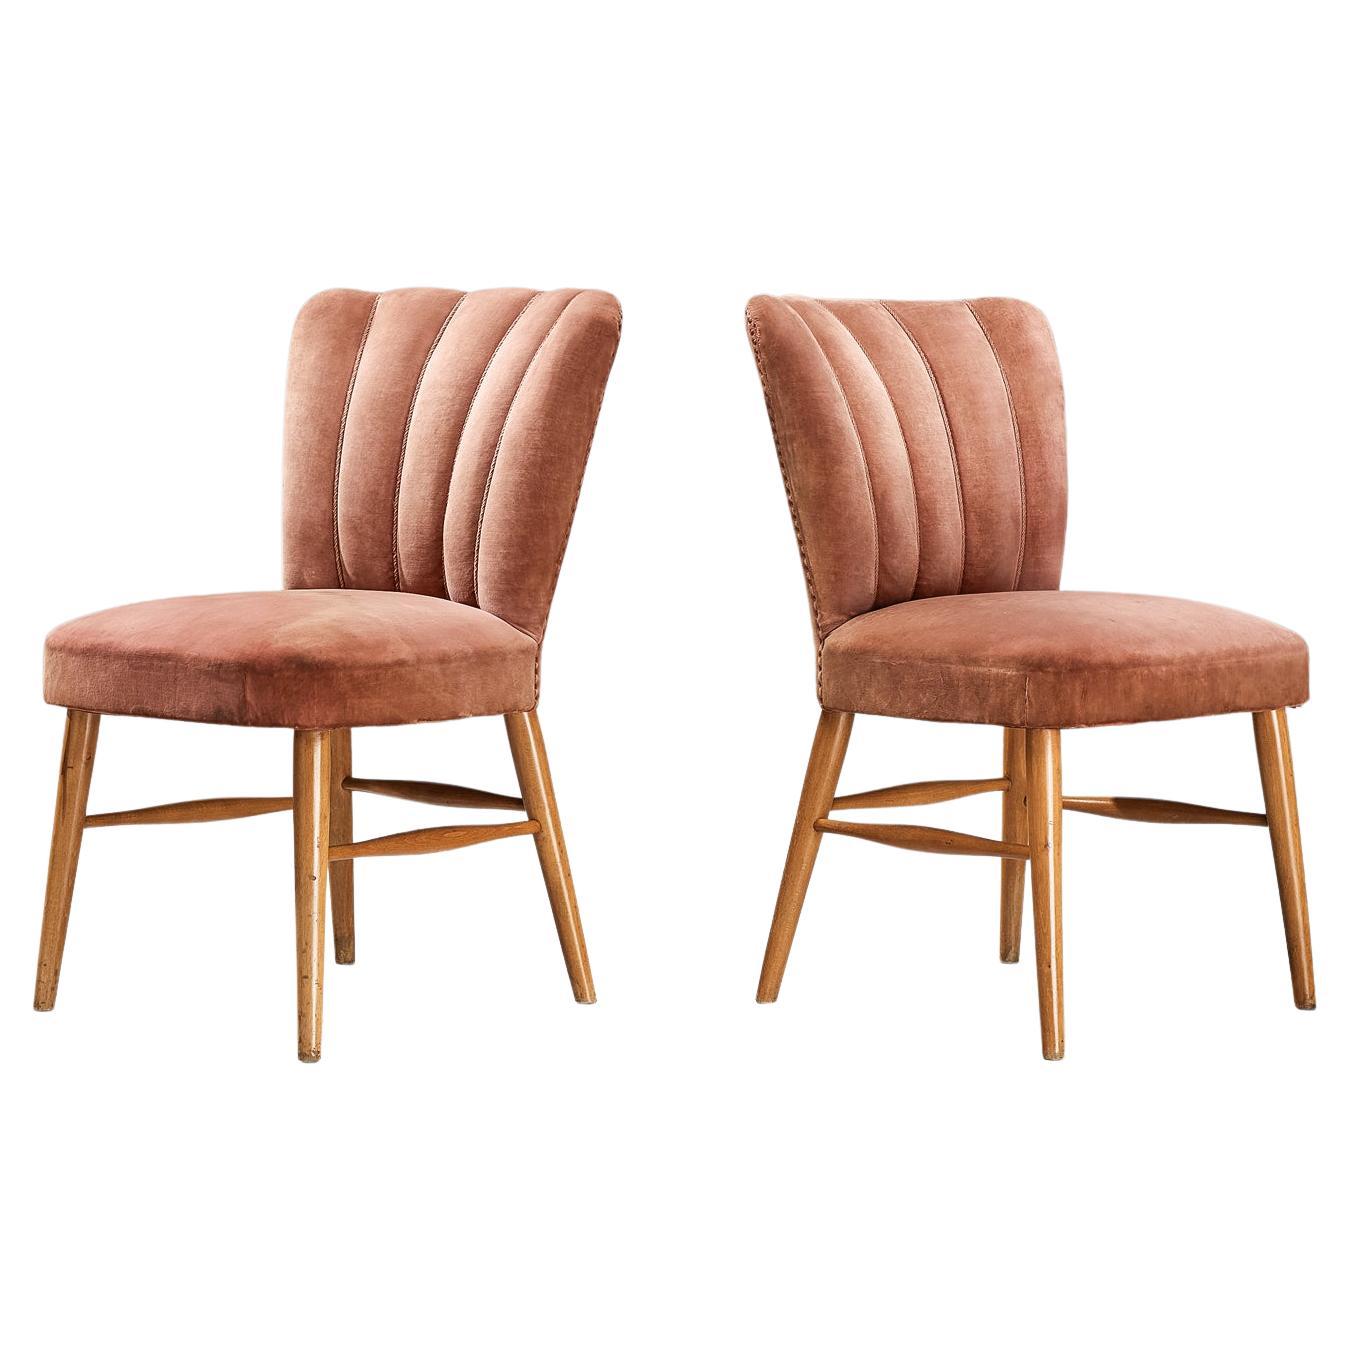 European Dining Chairs in Soft Pink Velvet Upholstery and Wood 